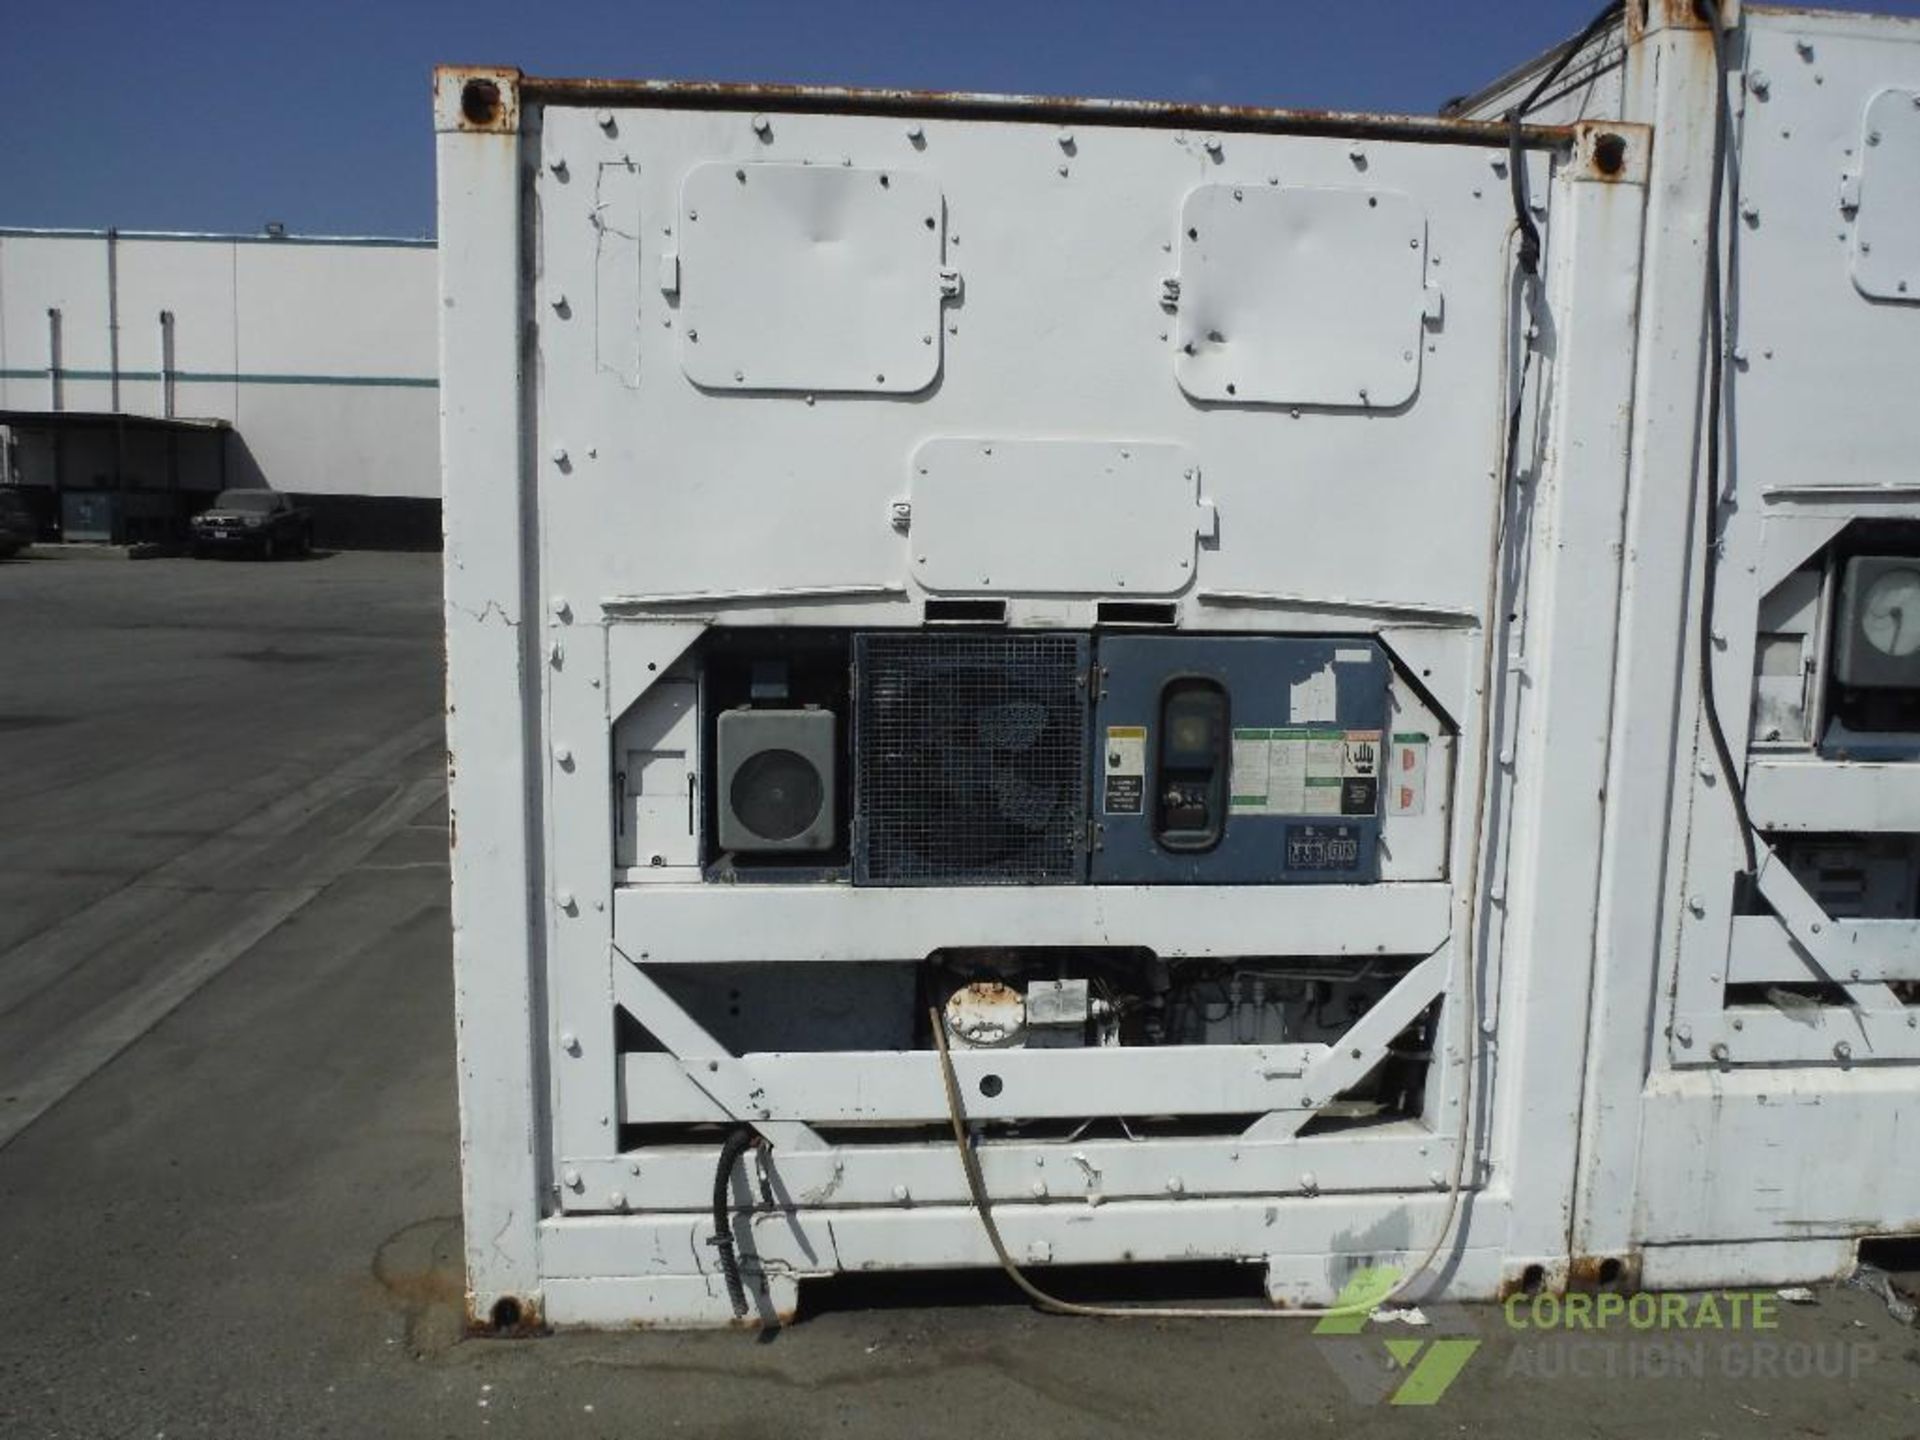 1987 Fruehauf refrigerated shipping container, Model KARX40TBE, SN FM8567, 40 ft. x 96 in. wide x - Image 2 of 7